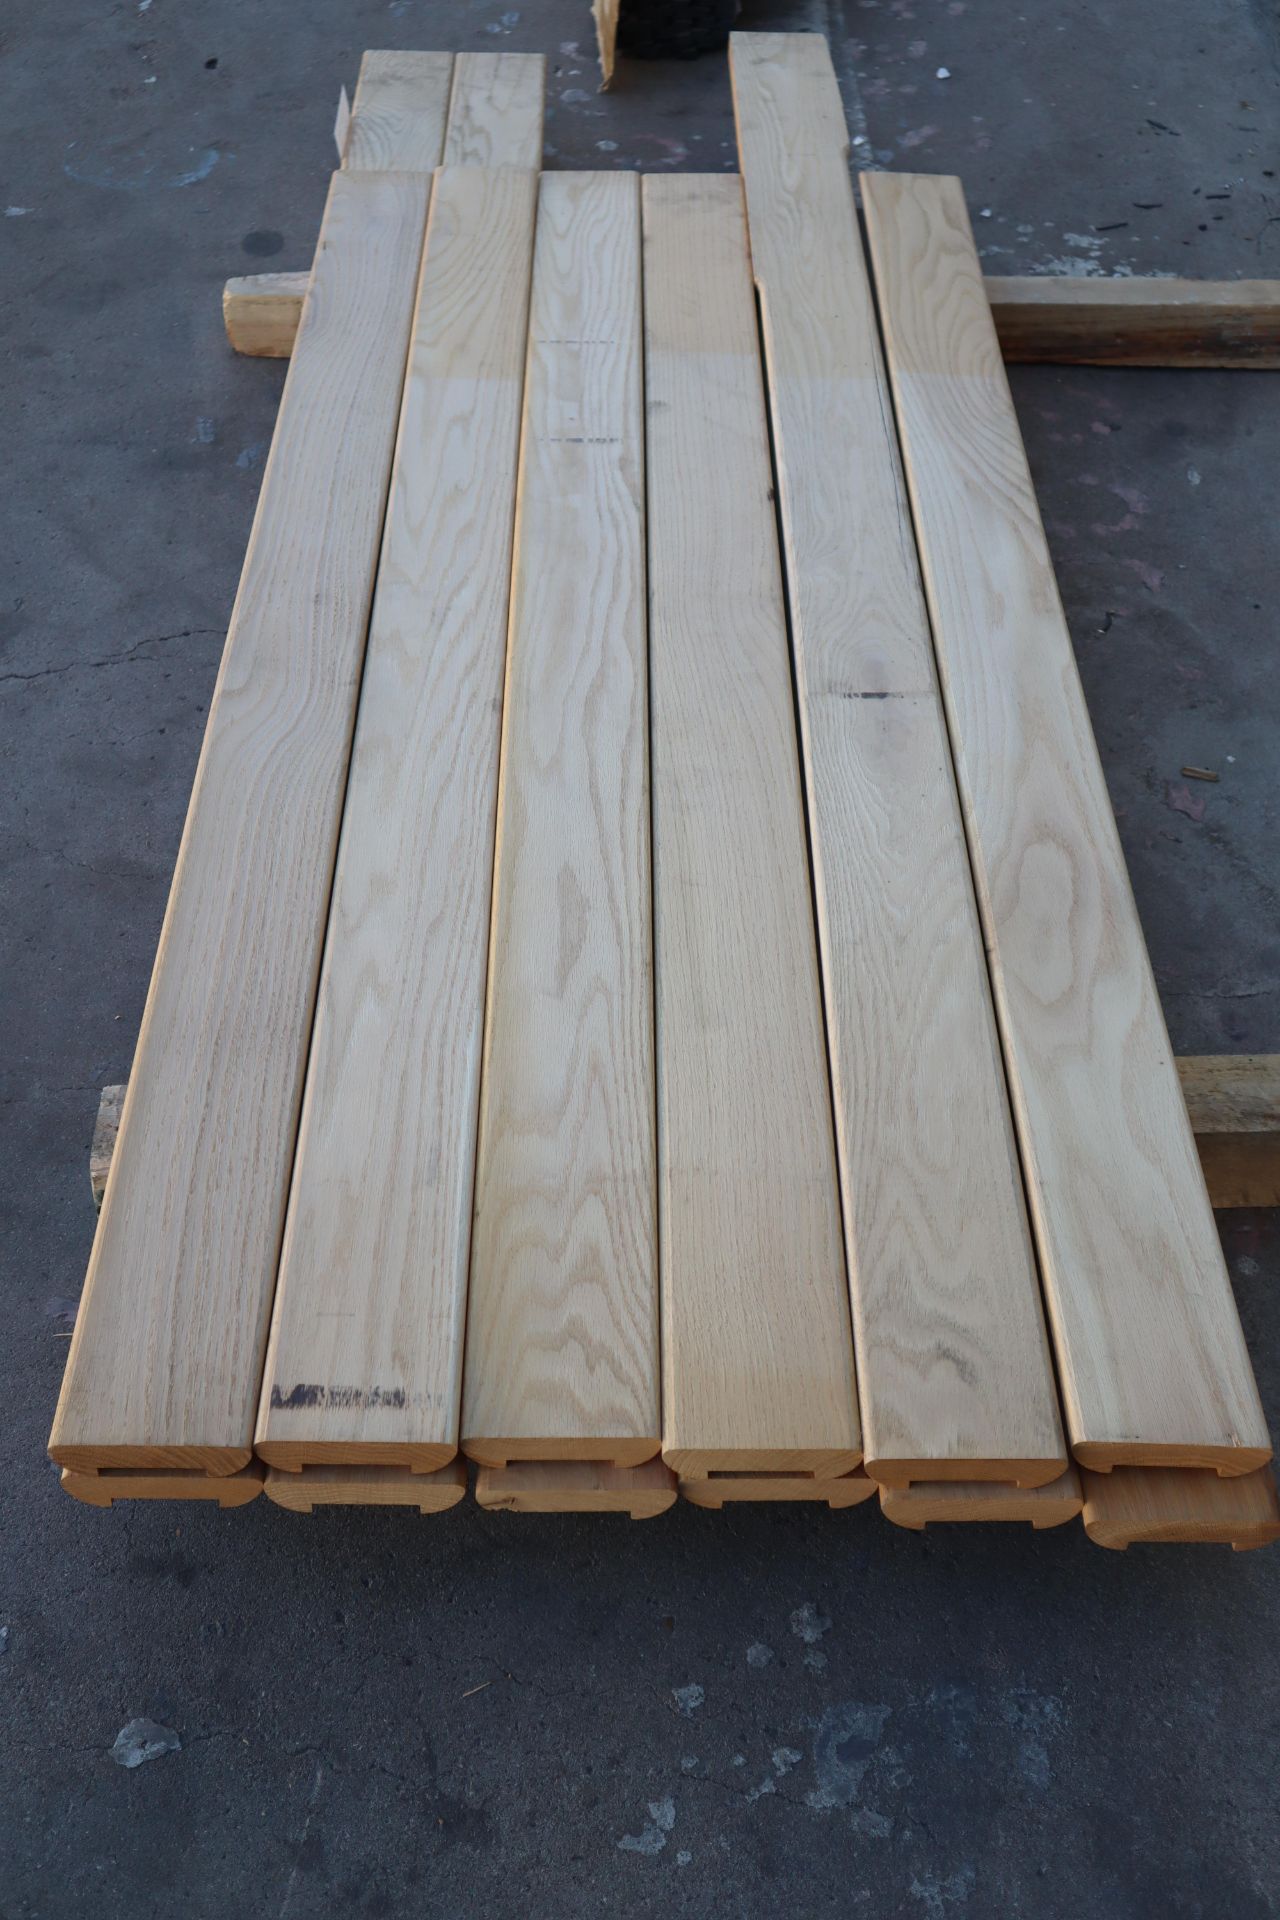 Lot of 4-1/4" Red Oak Molding 6'-7' Long - Image 2 of 4